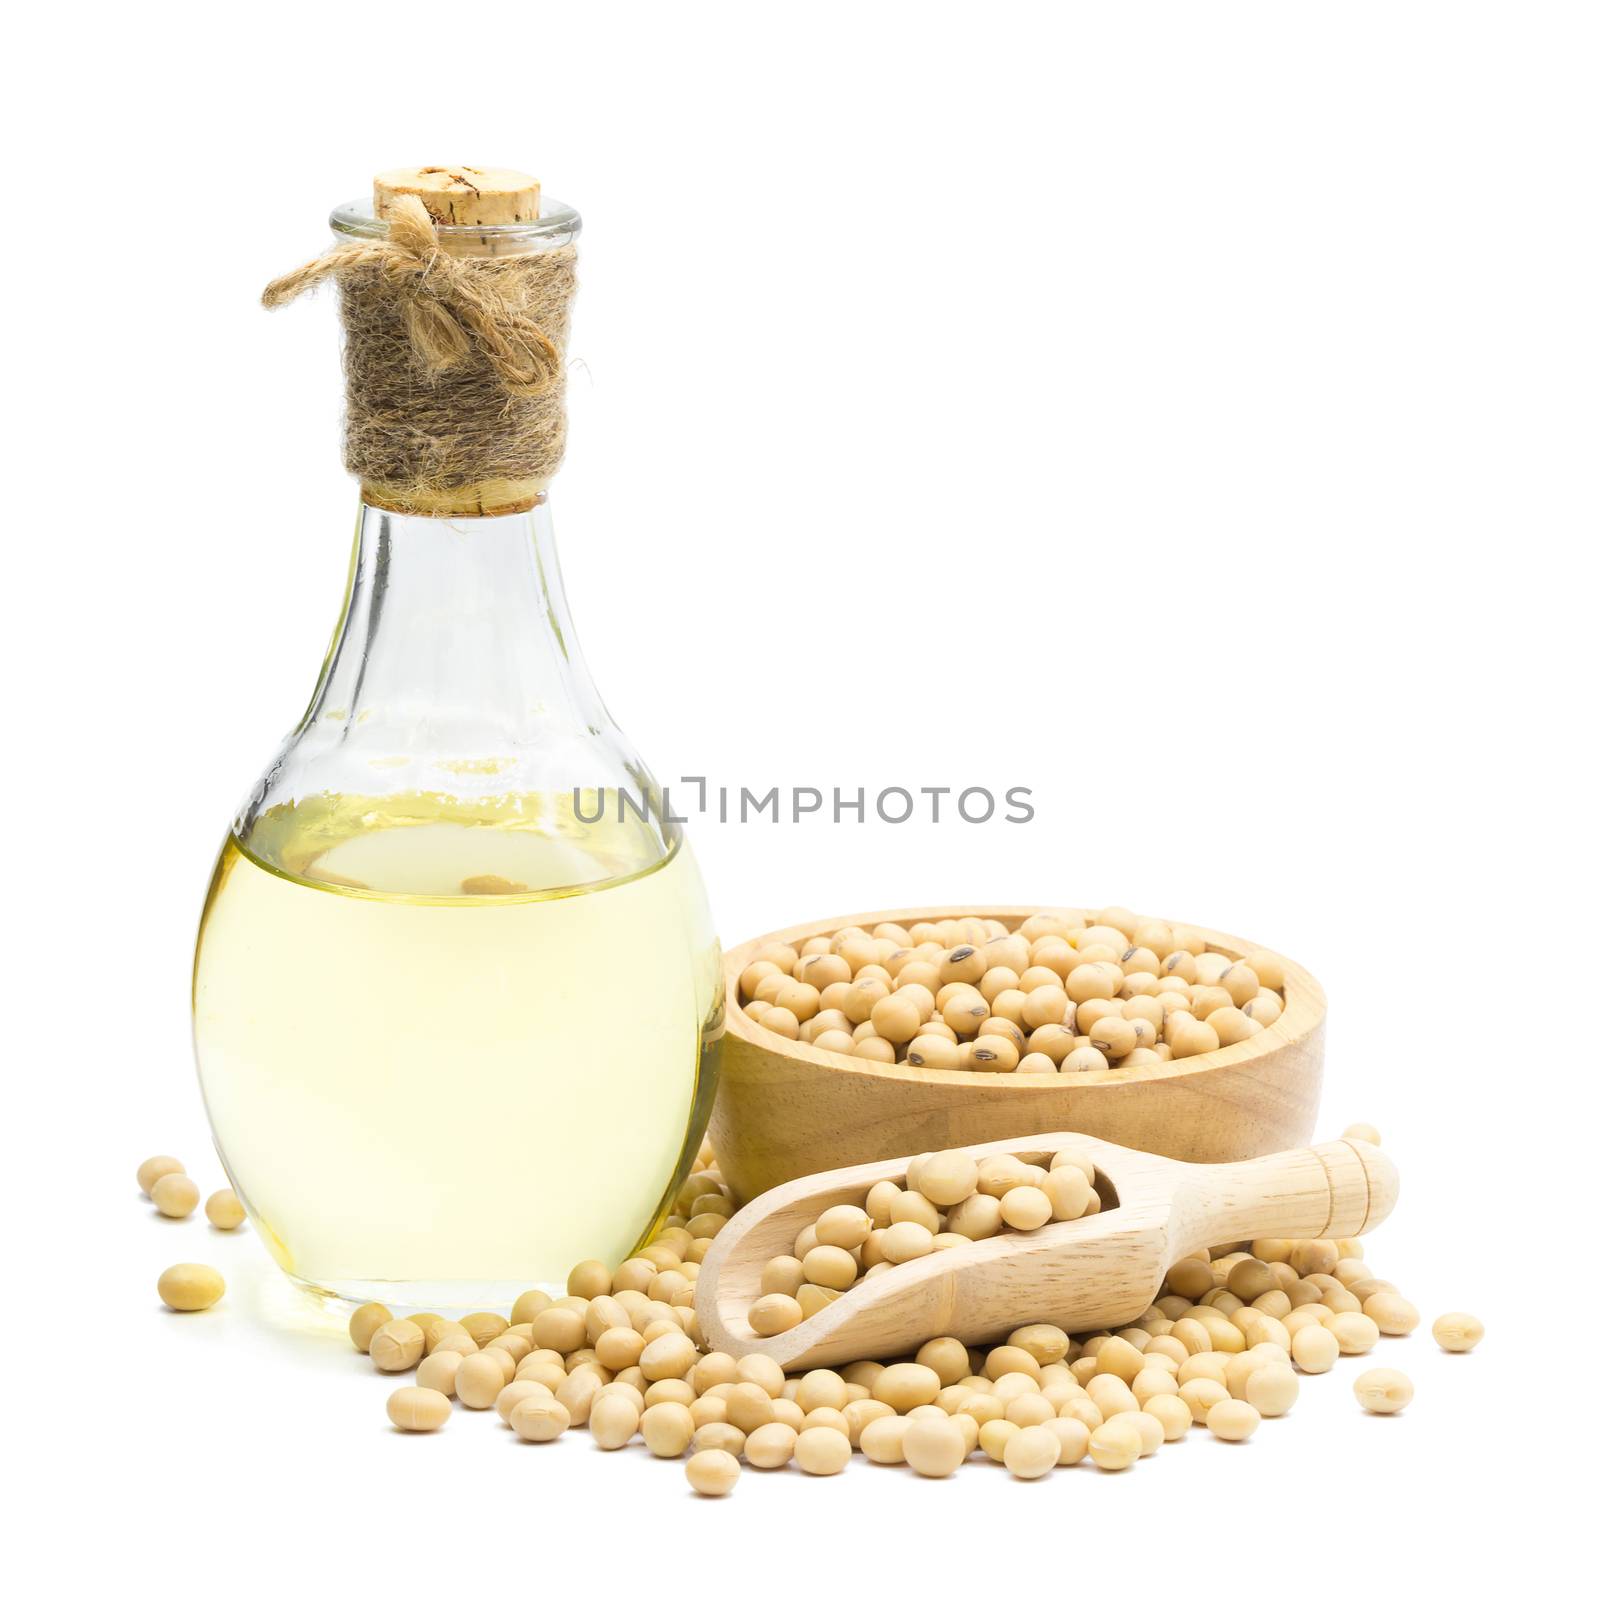 Soybean and Soybean oil bottle isolated on white background by kaiskynet